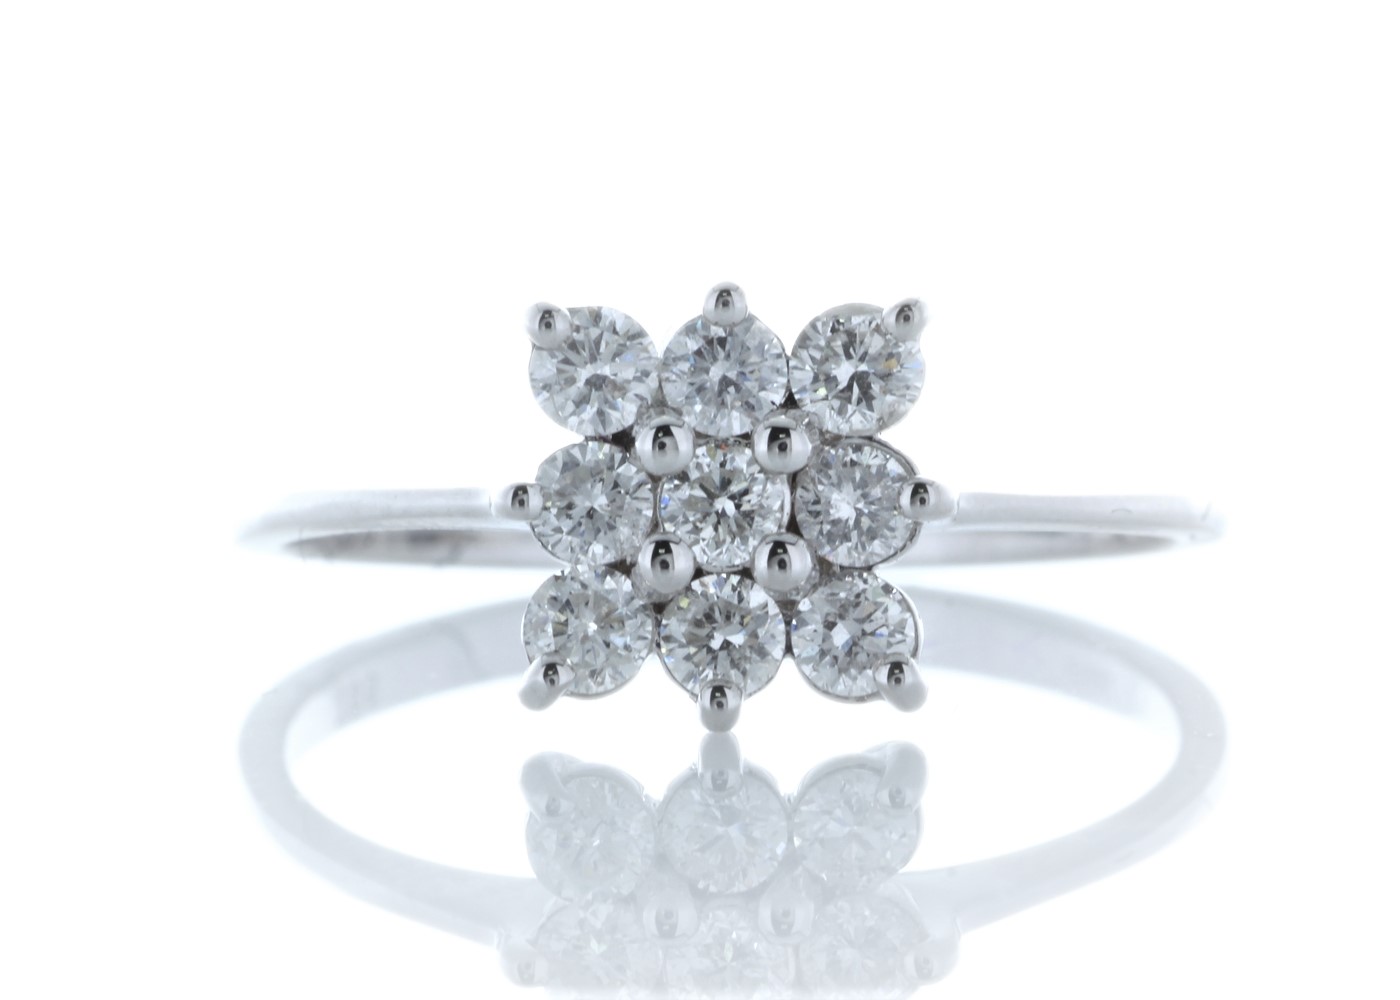 18k White Gold Fancy Cluster Diamond Ring 0.45 Carats